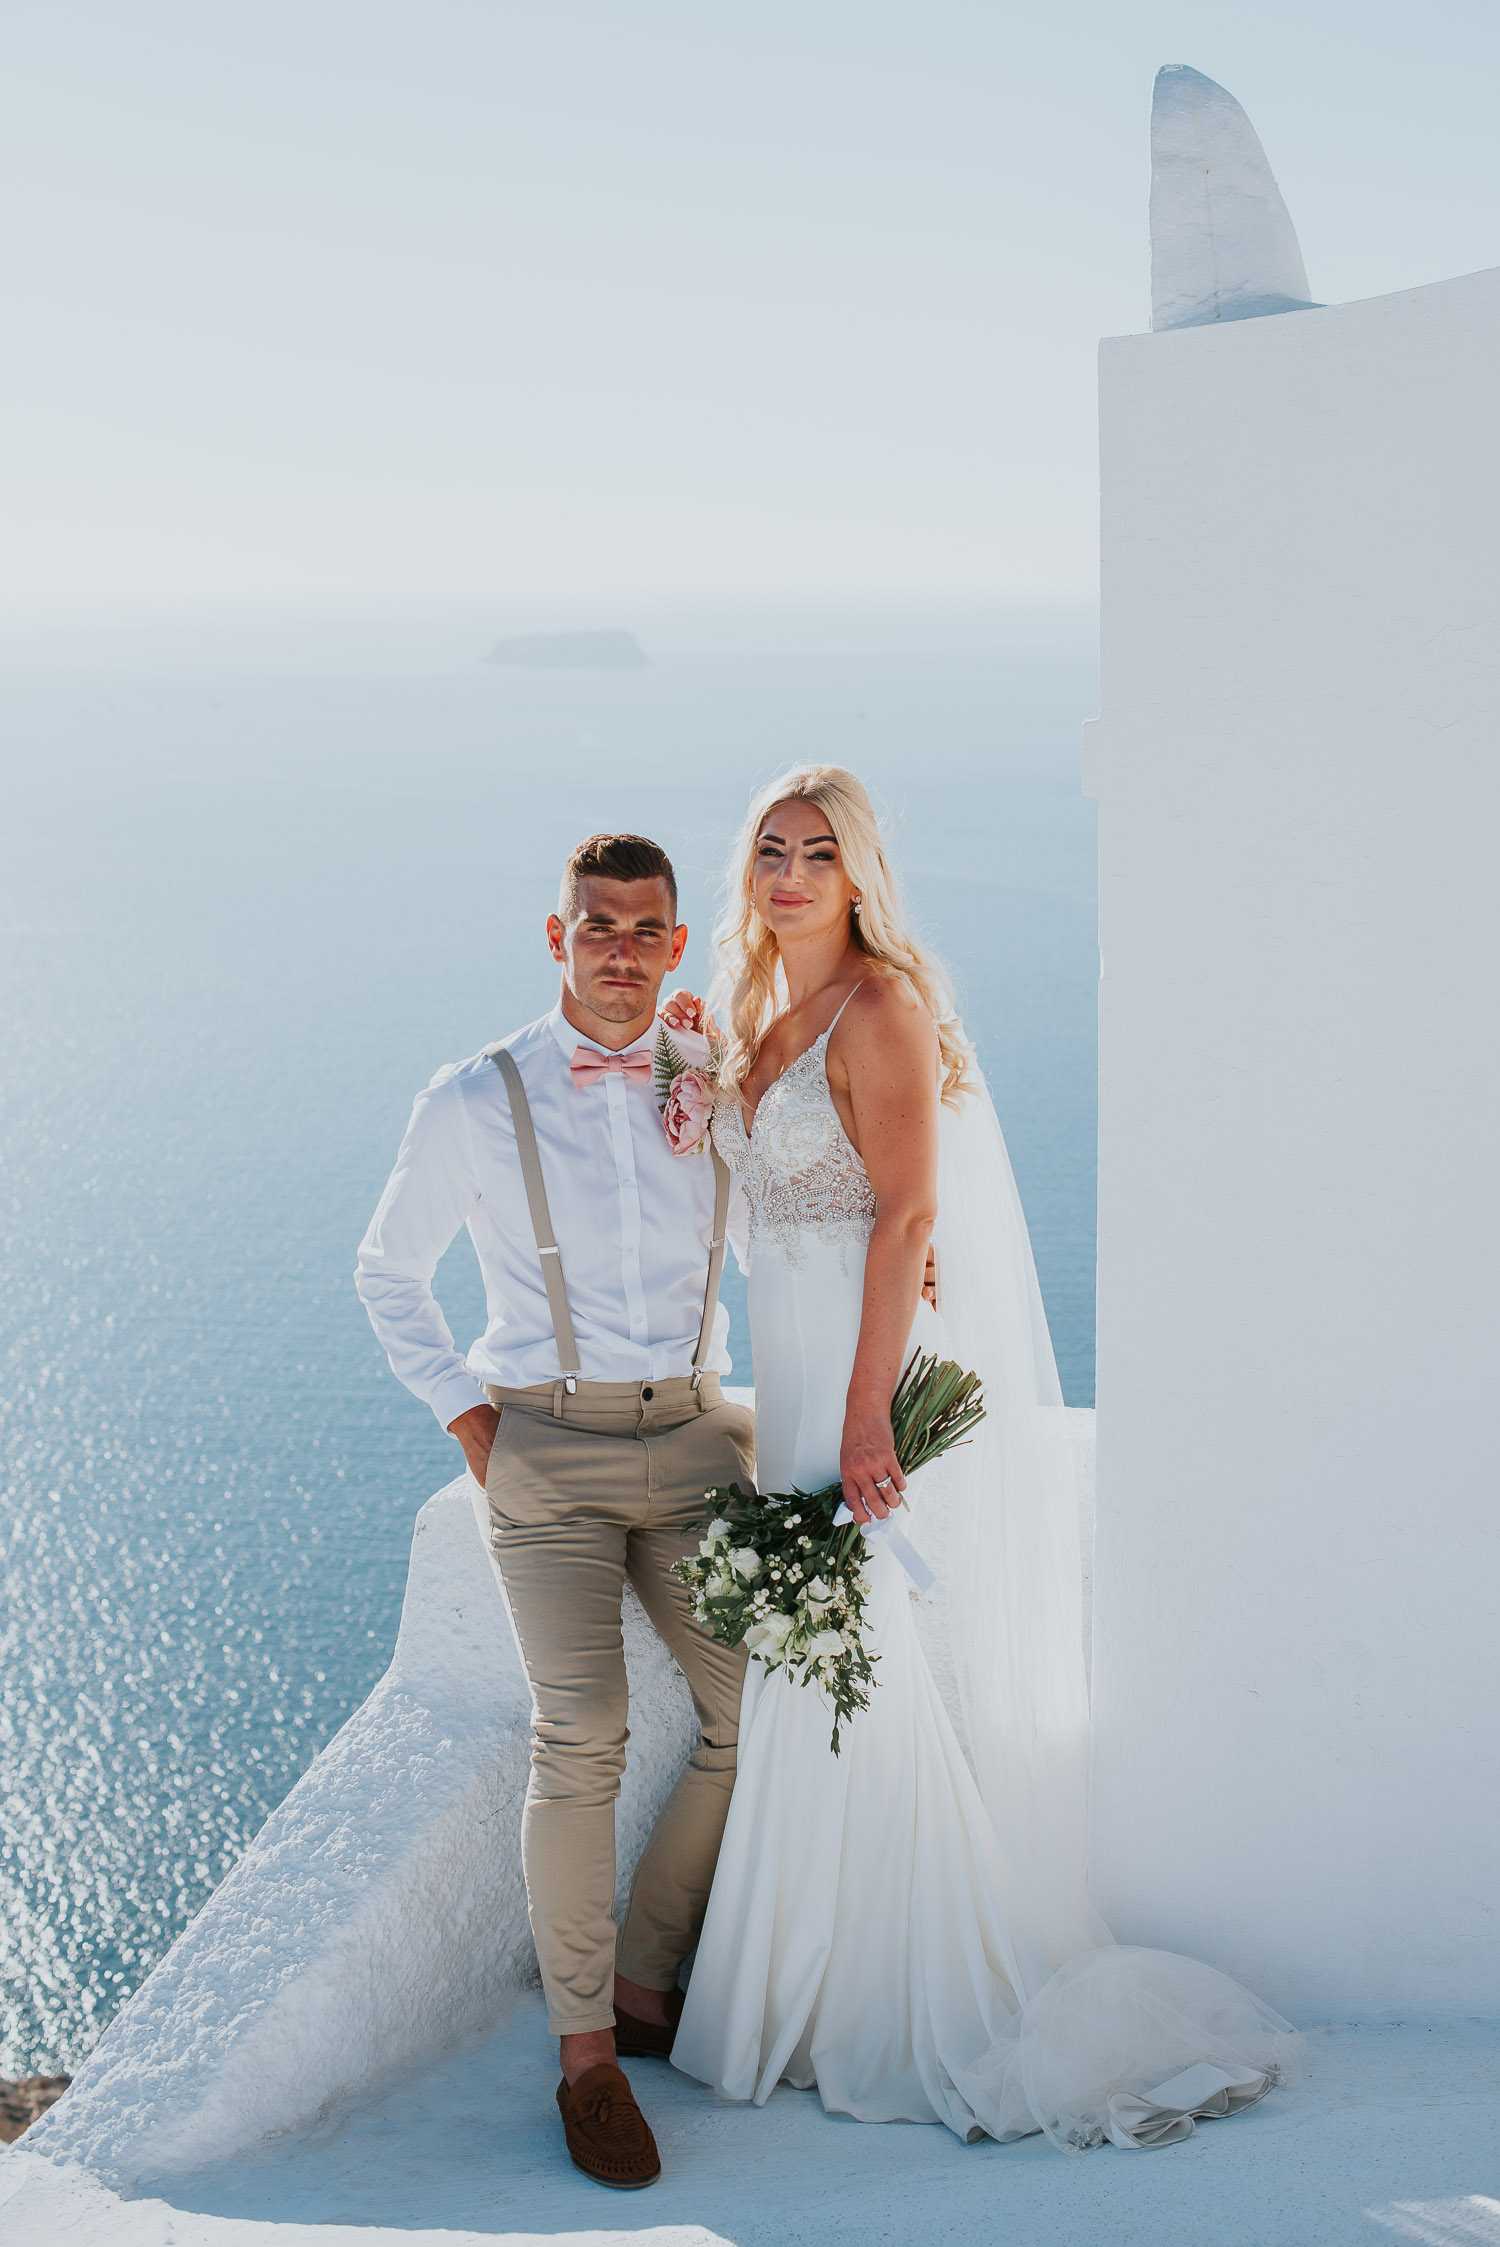 Wedding photographer Santorini: groom and bride looking at the camera next to the bell tower basked in the afternoon light by Ben and Vesna.